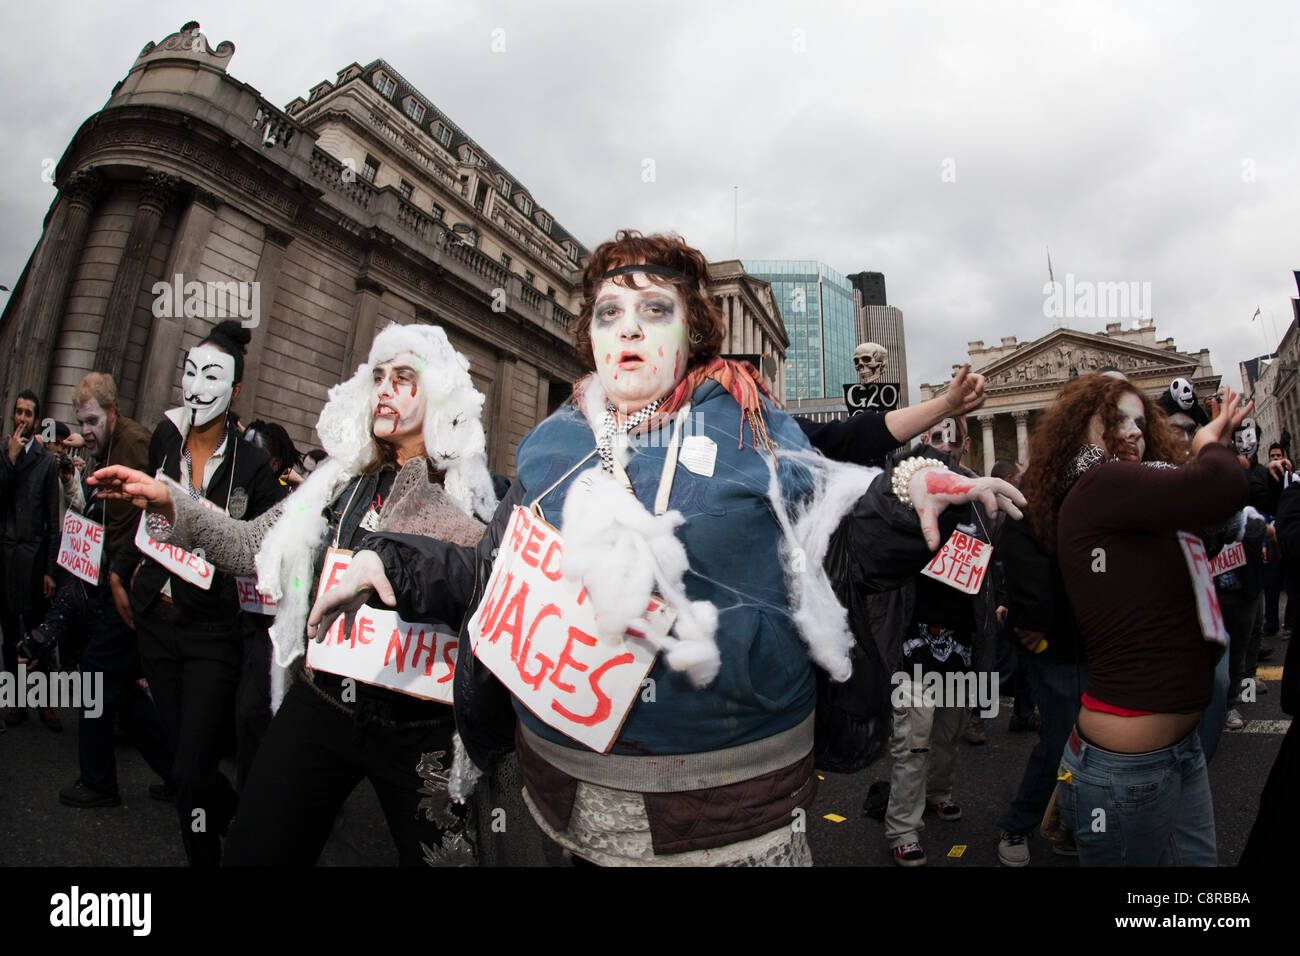 31 October 2011, London, UK. Around 50 Zombies dressed as 'Bankers' marched through the City of London on Halloween. Outside the Bank of England they stopped and danced to Michael Jackson's Thriller. Stock Photo